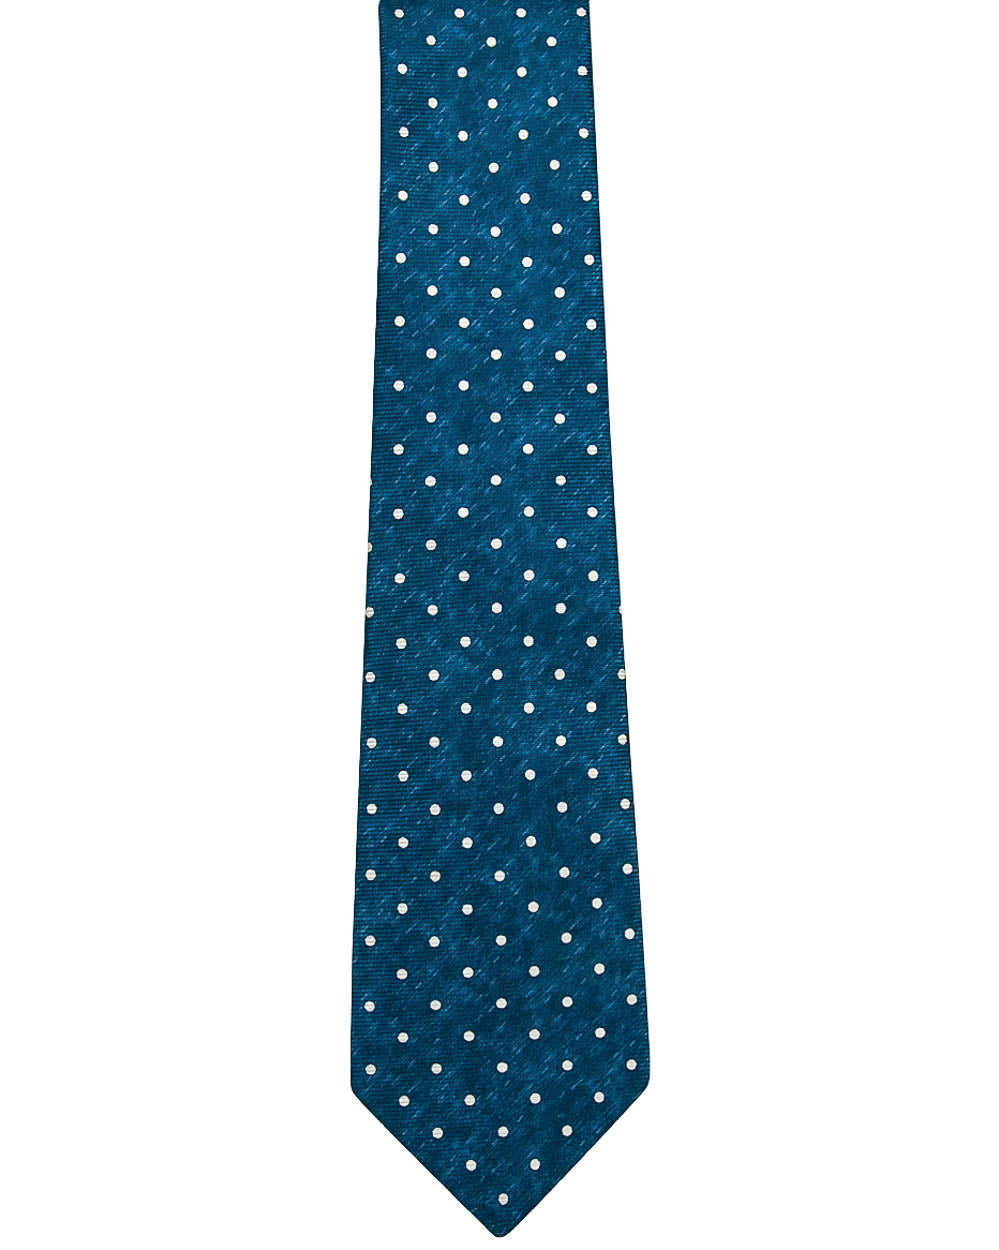 Denim and White Dotted Tie